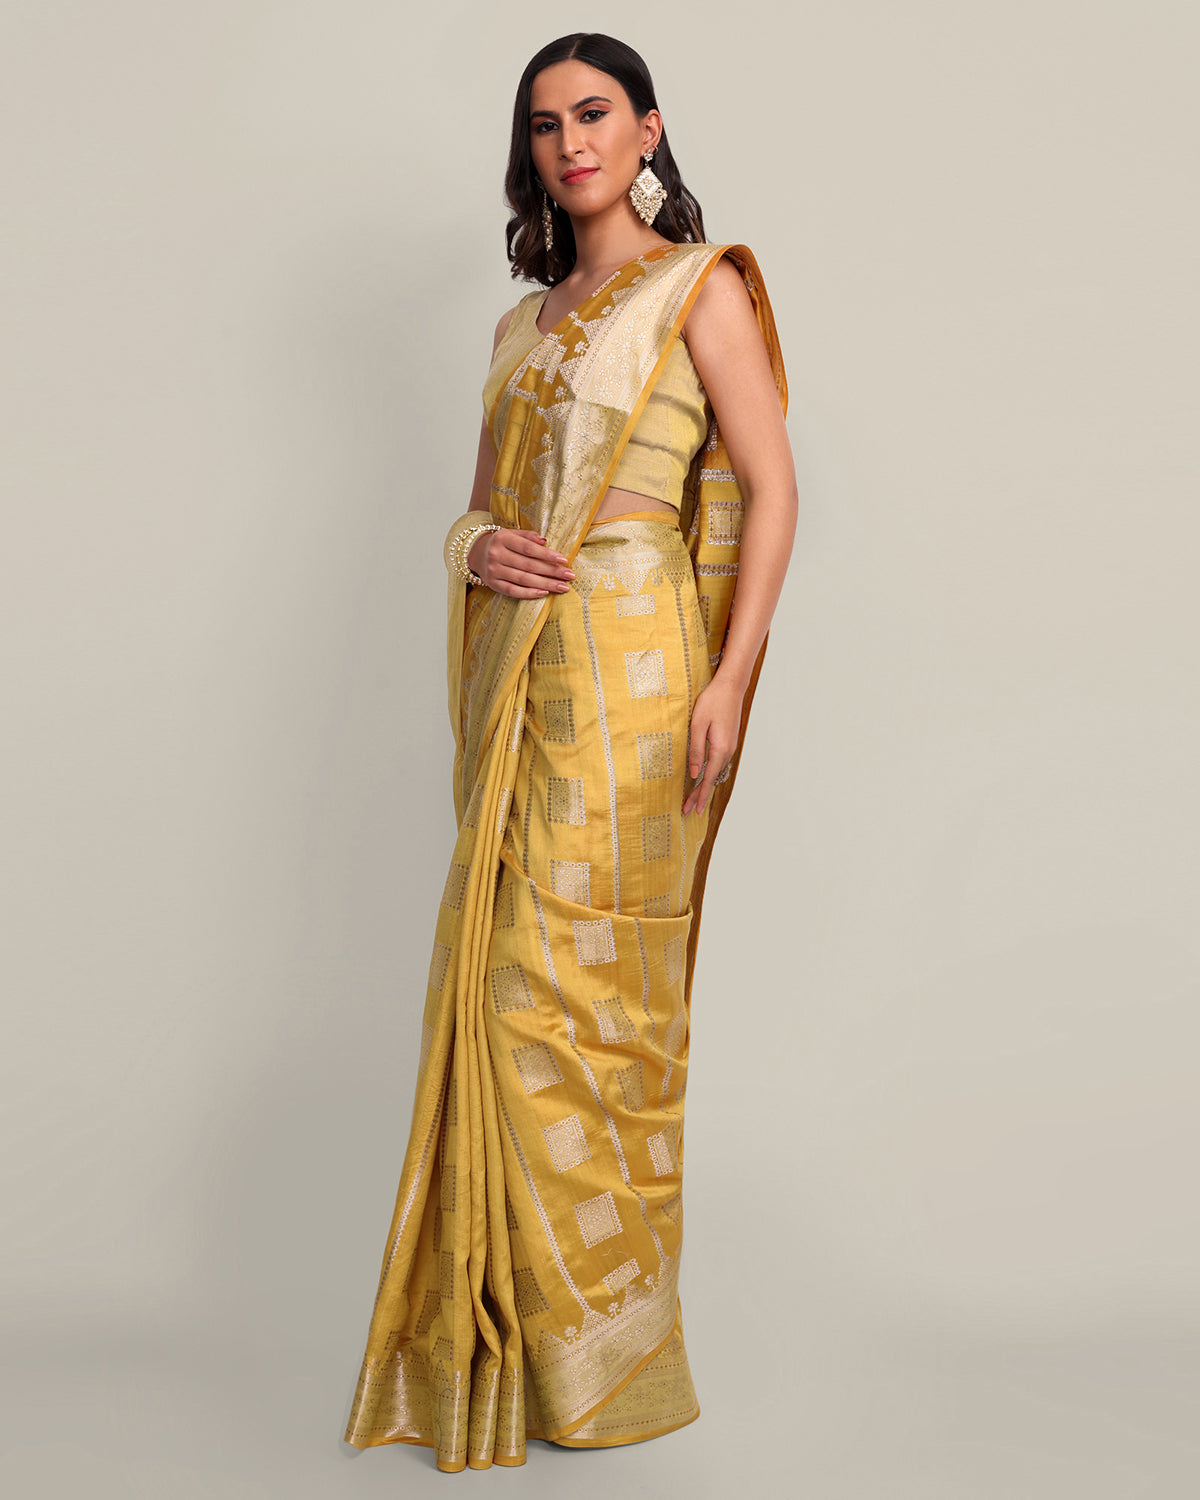 Buy Honey colour Cotton Silk Saree With blouse piece at Amazon.in